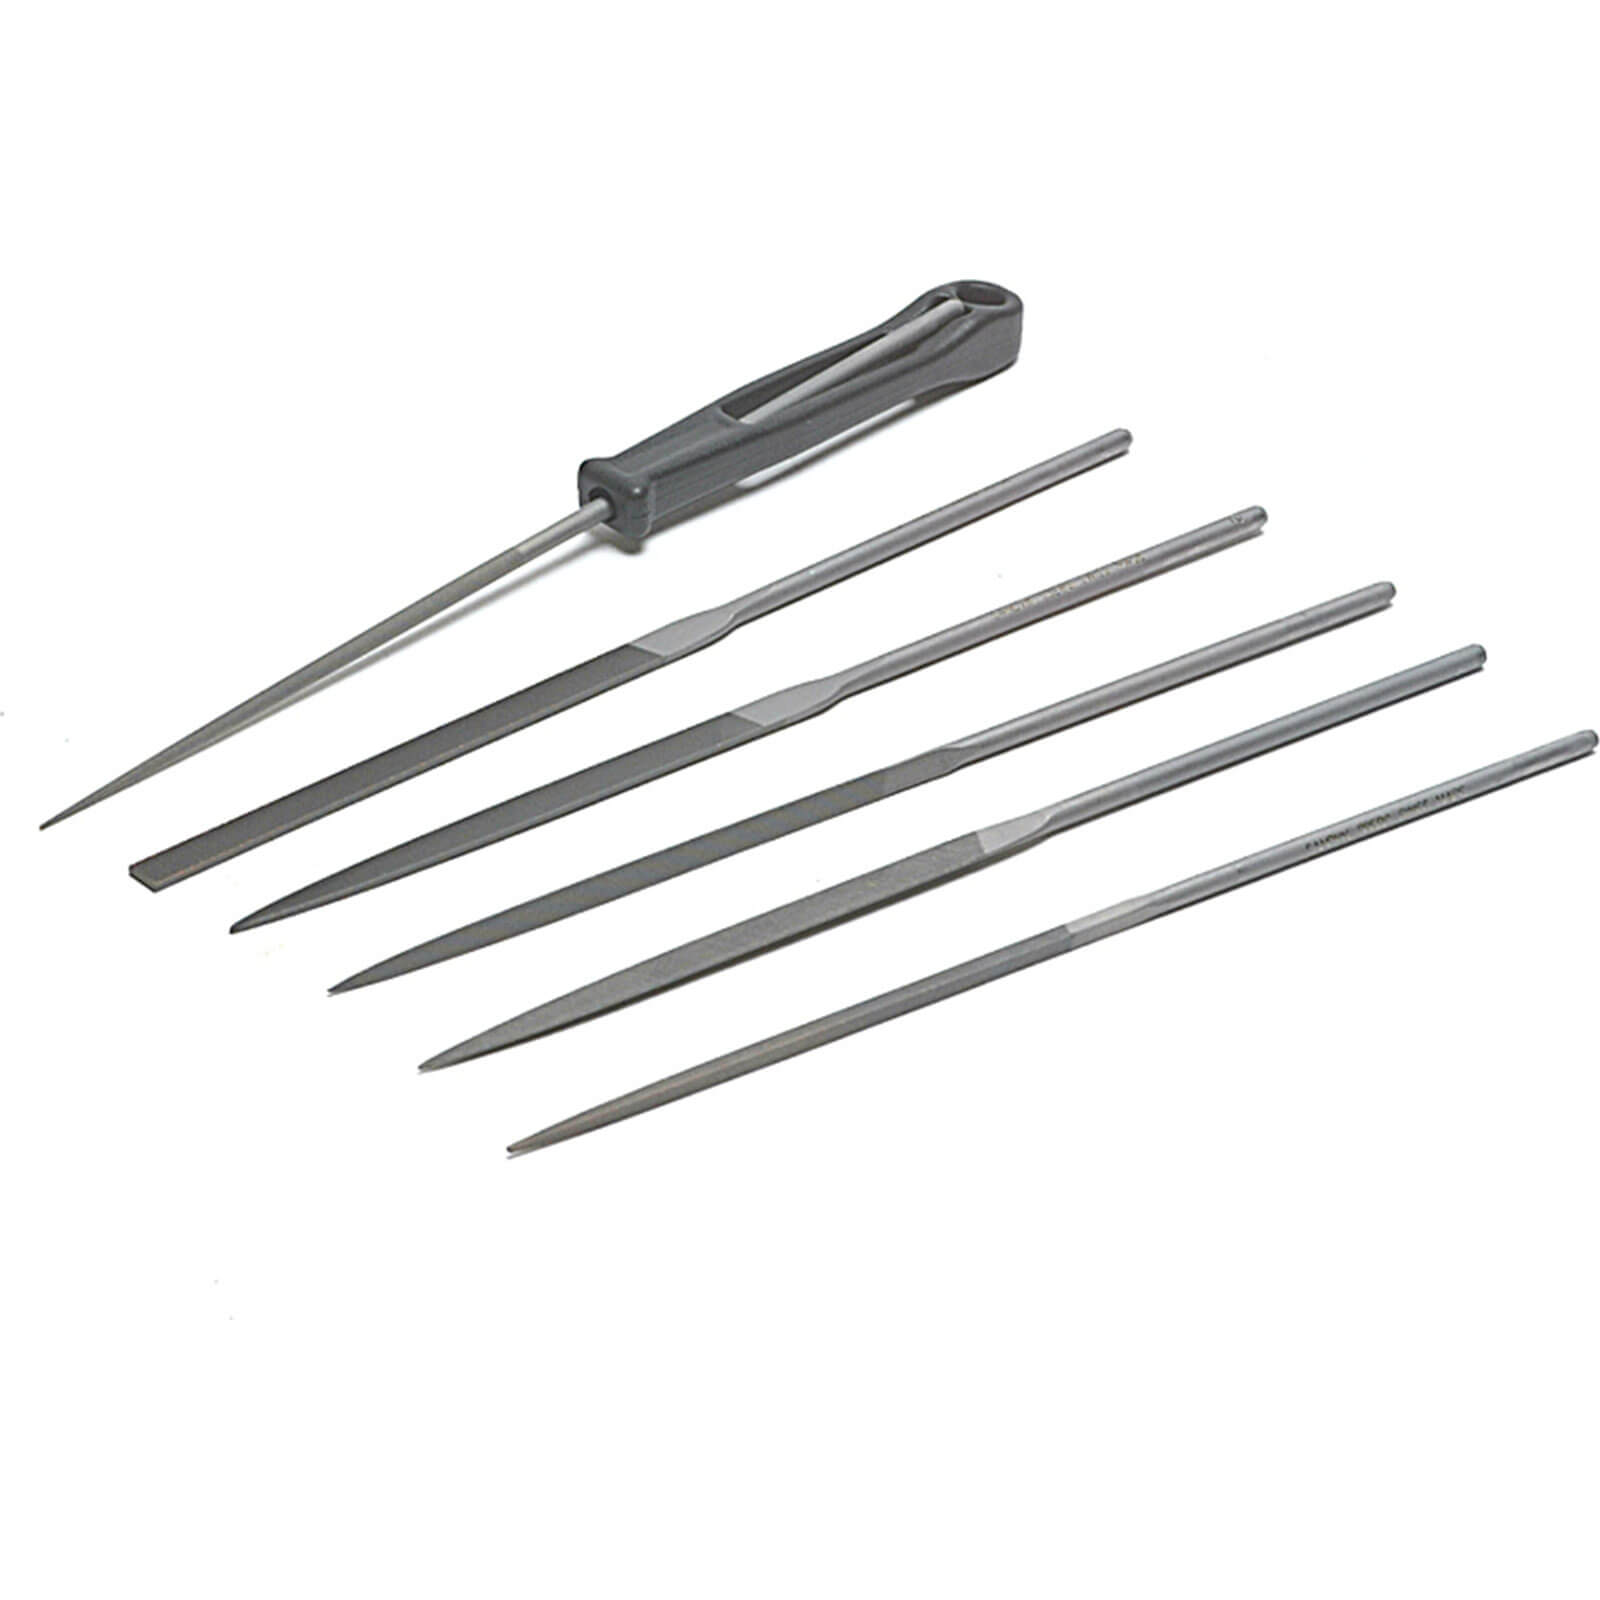 Image of Bahco 6 Piece Precision Needle File Set in Plastic Wallet